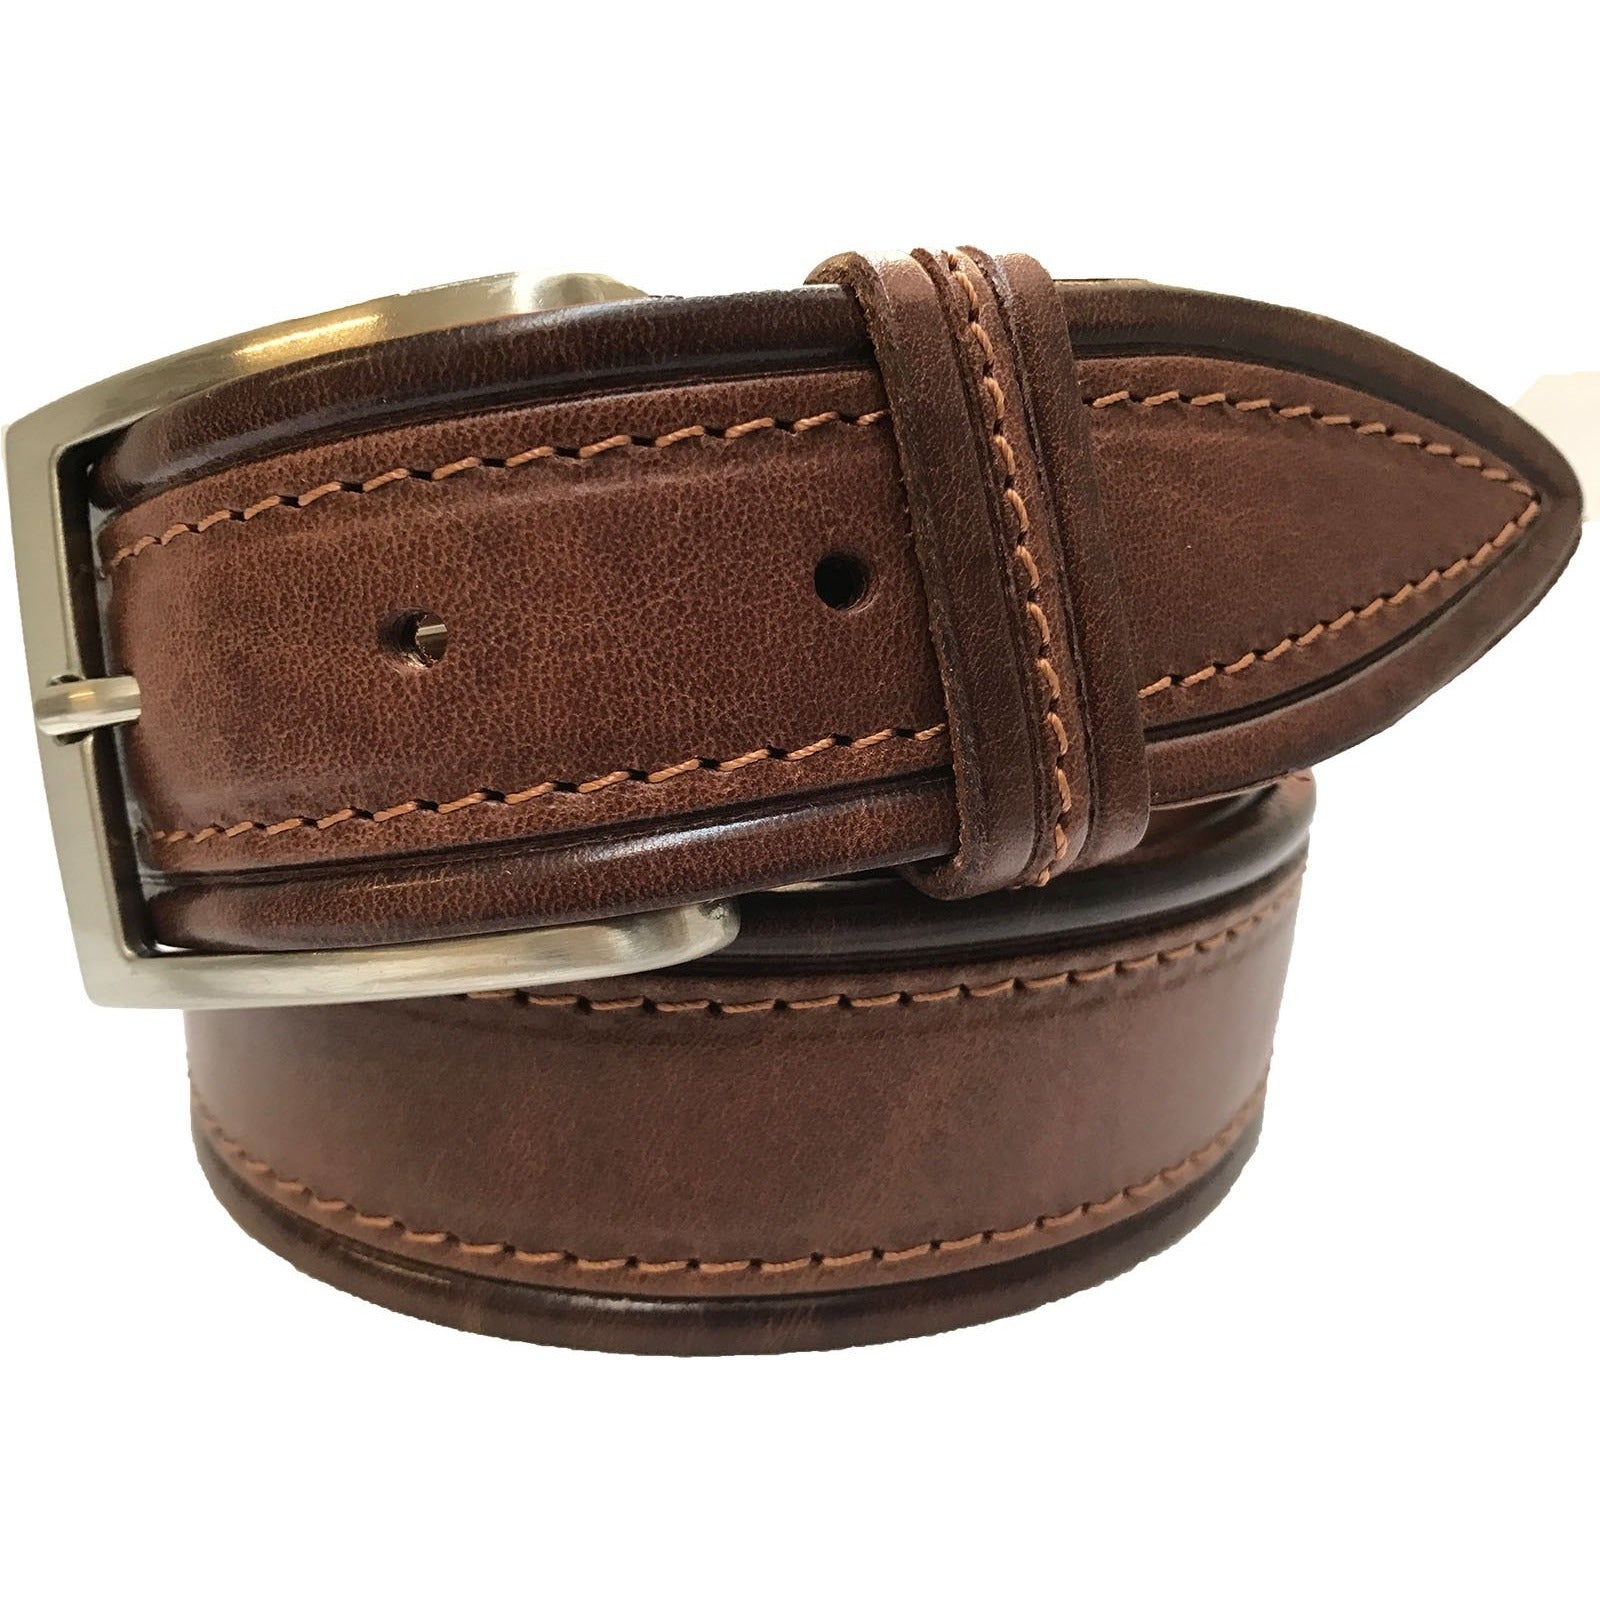 COGNAC TAN POINTED TIP EMBOSSED & STITCHED STRIPE LEATHER BELT